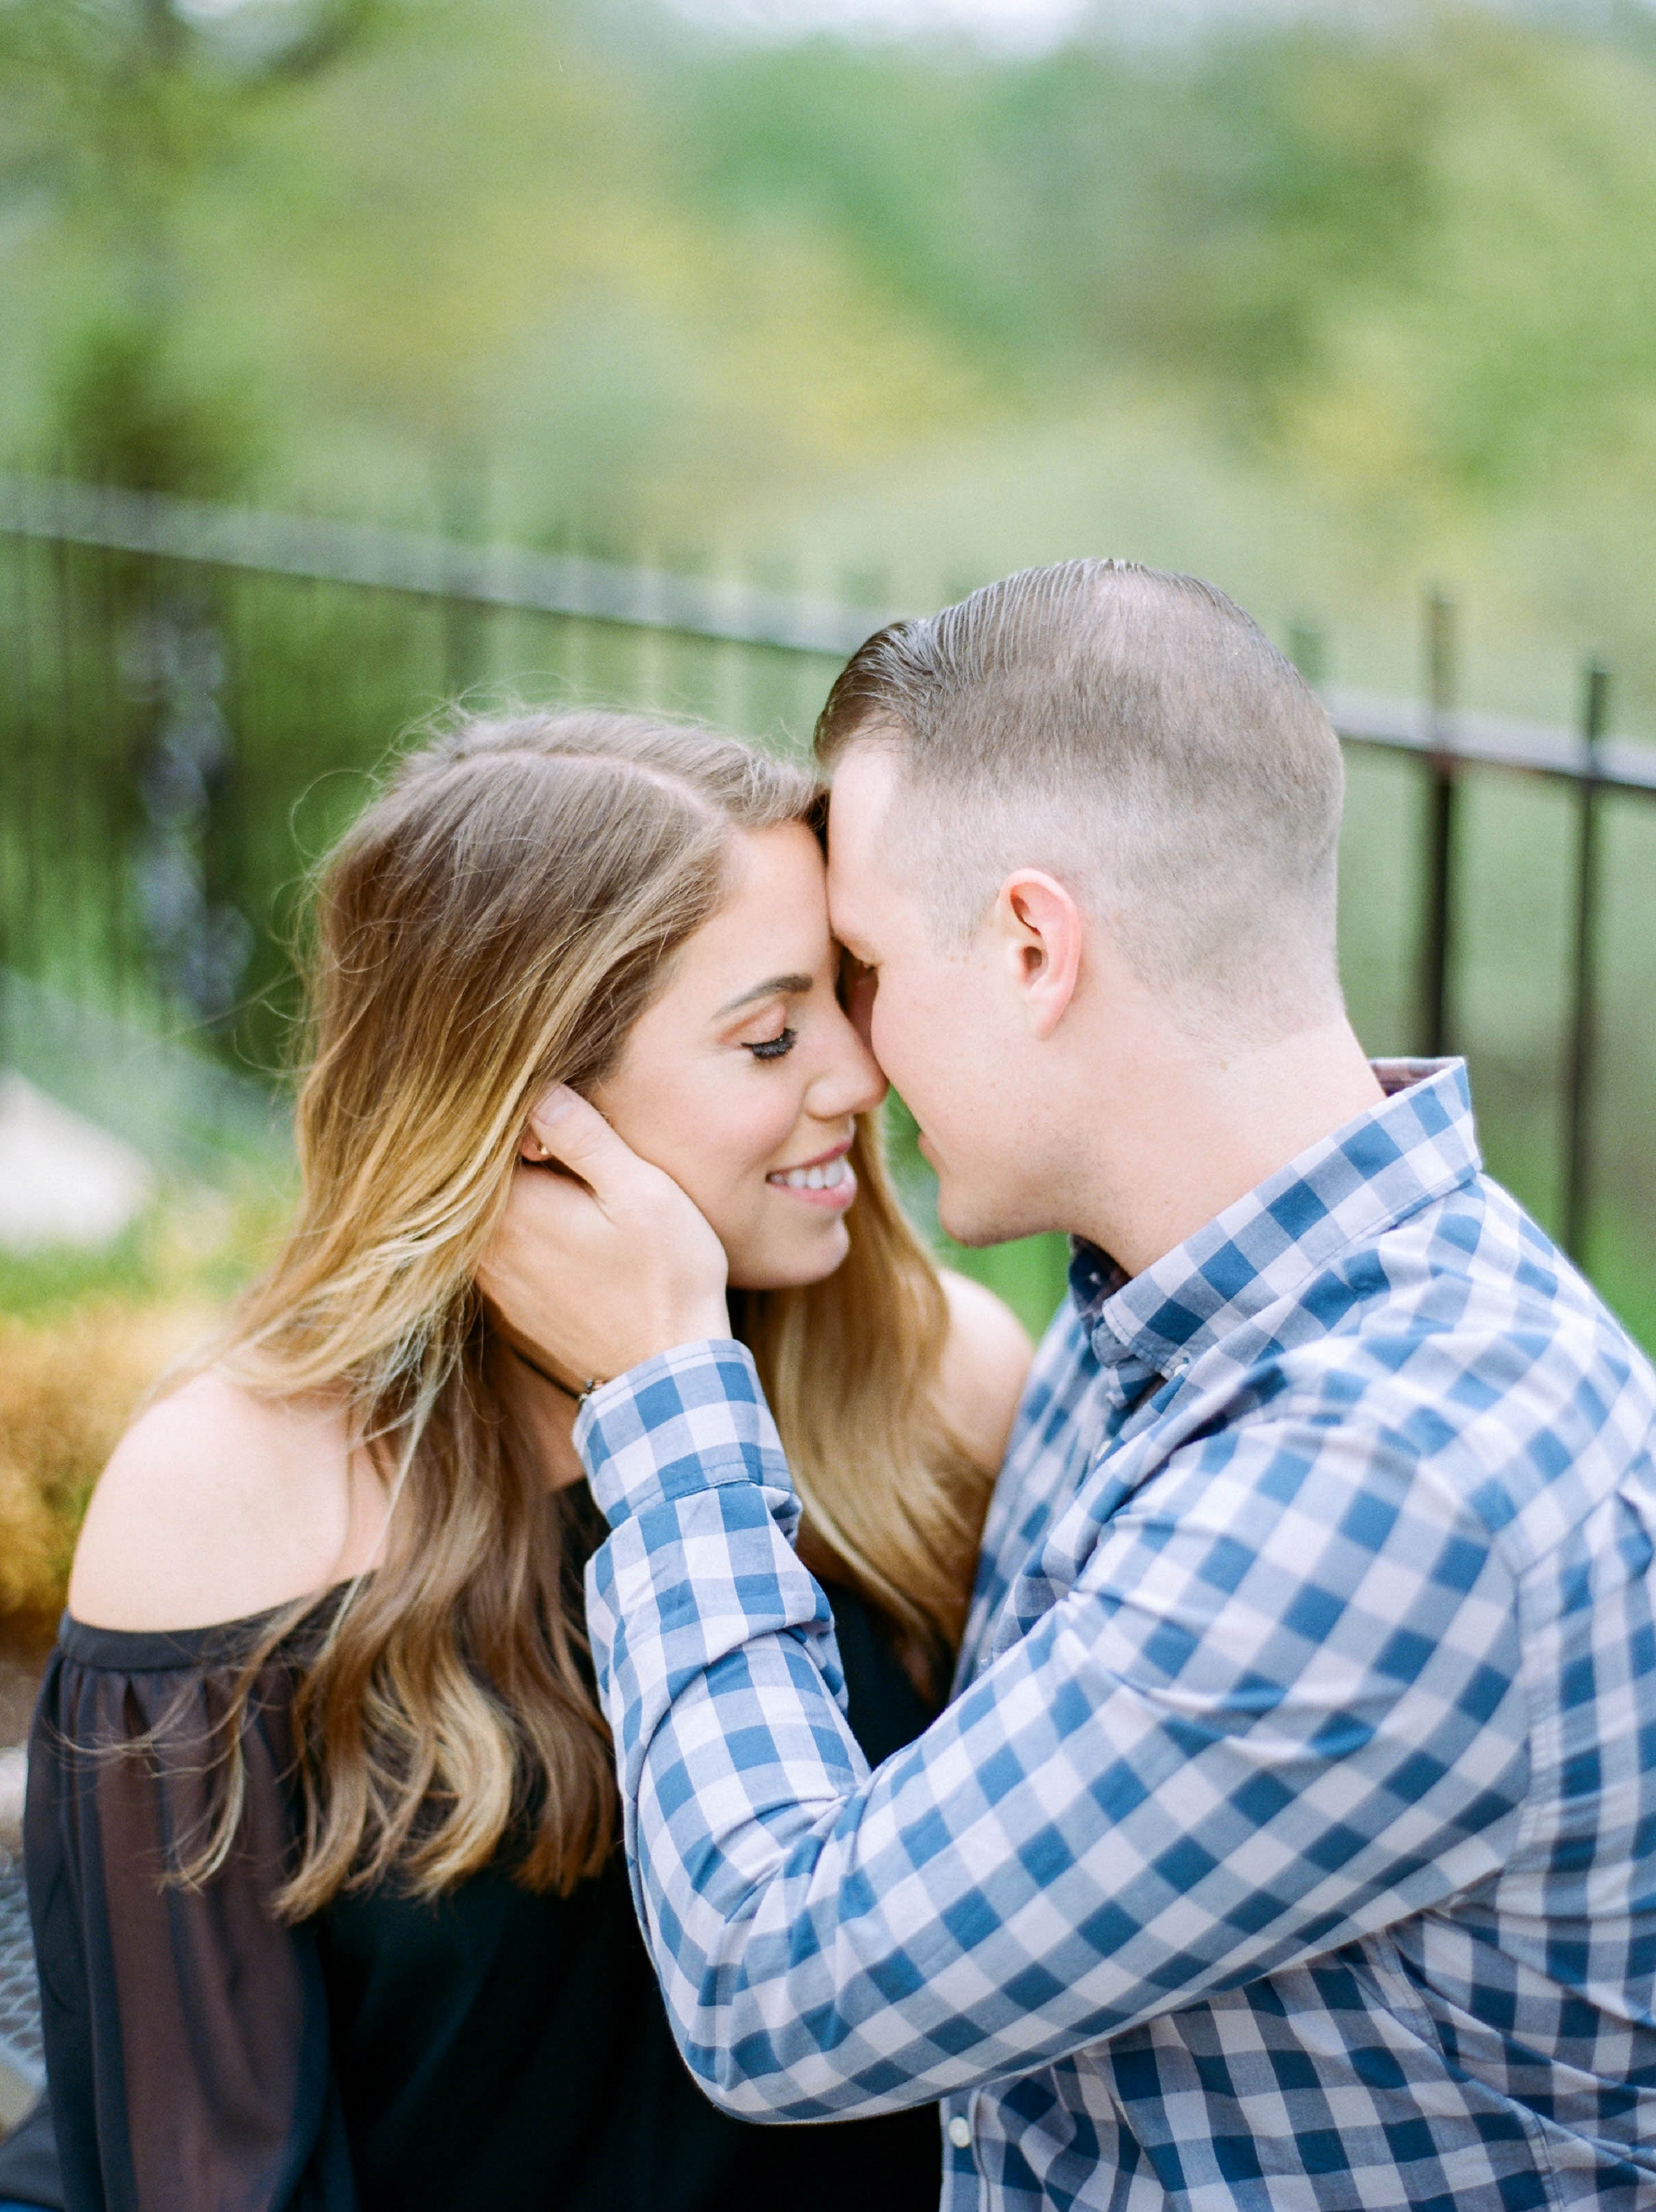 A Lakeside Engagement Session - Carrie House Photography